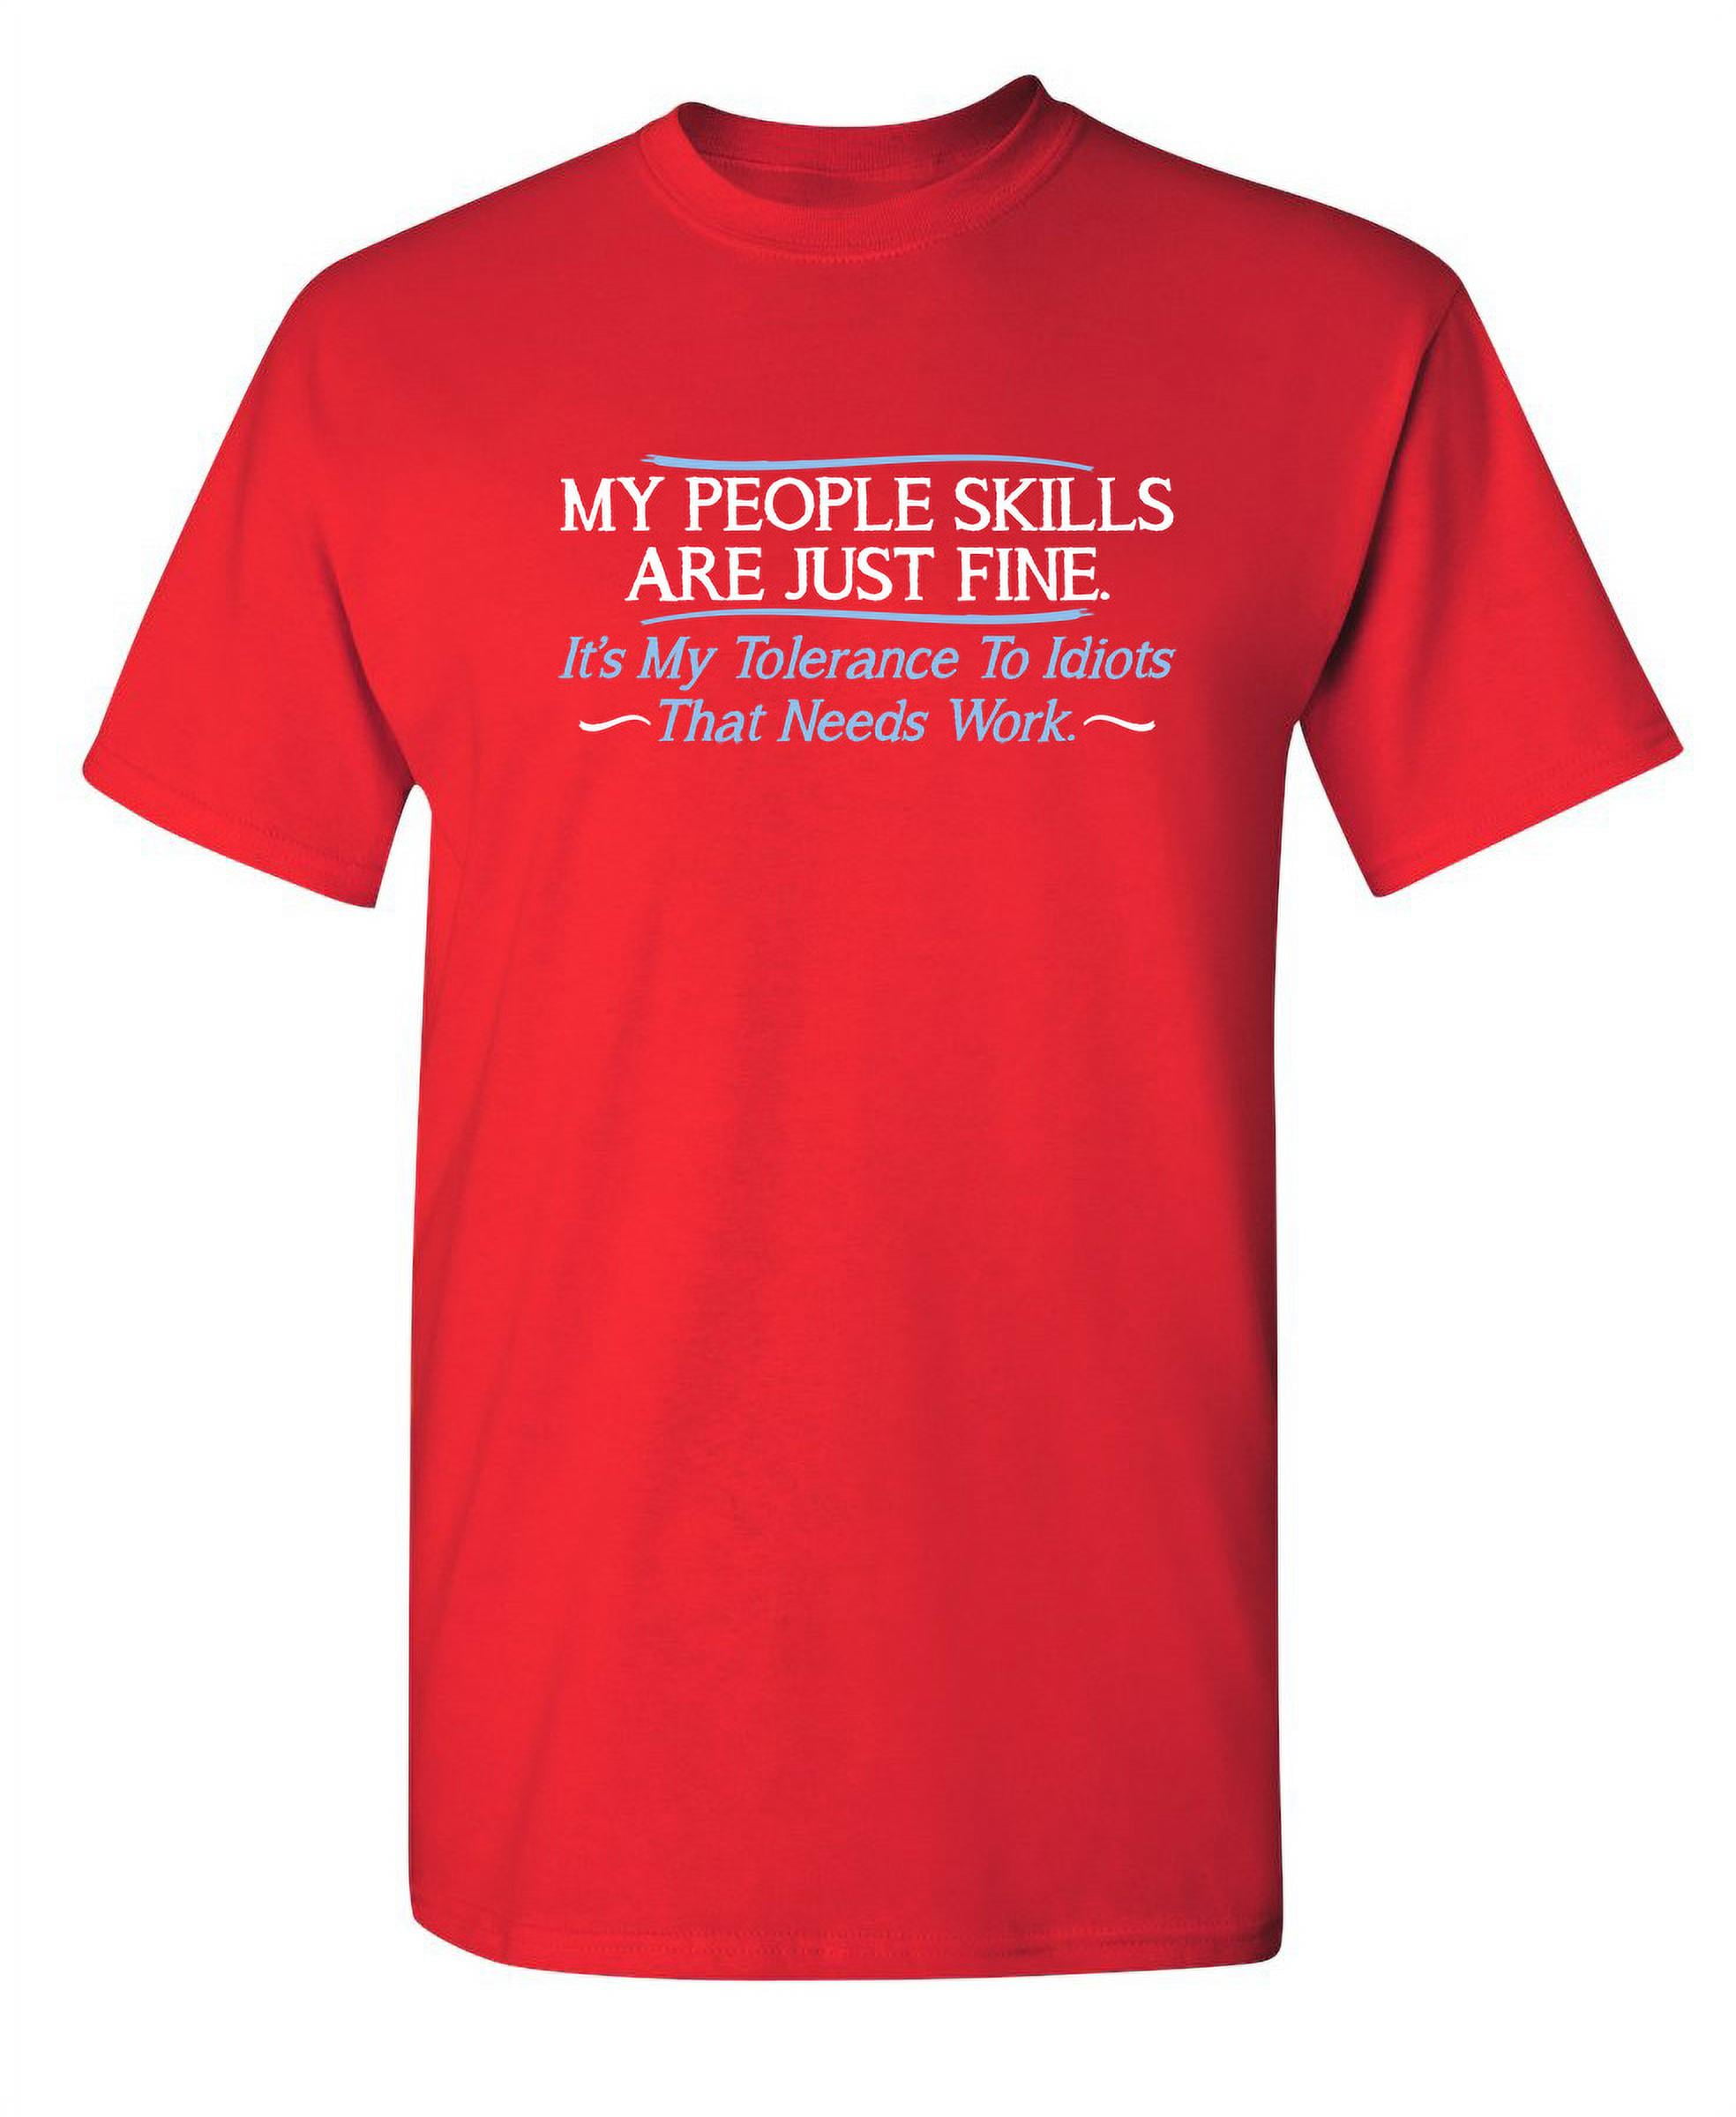 My People Skills are Fine Novelty Humor Graphic Tee Christmas Holiday  Anniversary Gift Tshirt Sarcastic Funny T Shirt